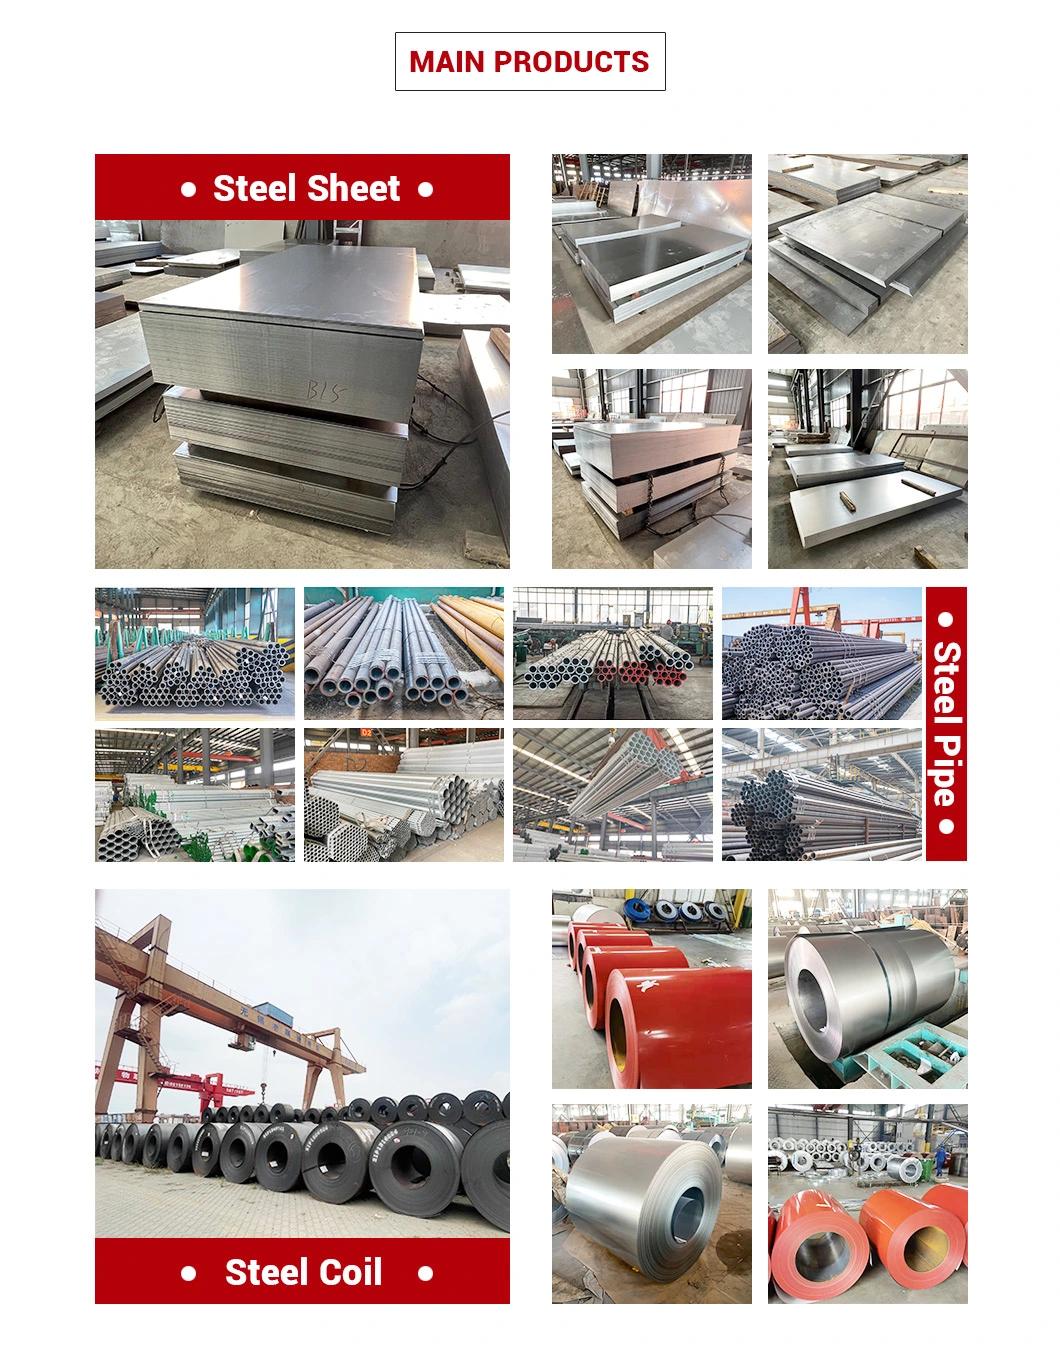 Non-Secondary Carbon/Stainless/Galvanized Ouersen Standard Packing Q235 Hot DIP Galvanized Coating